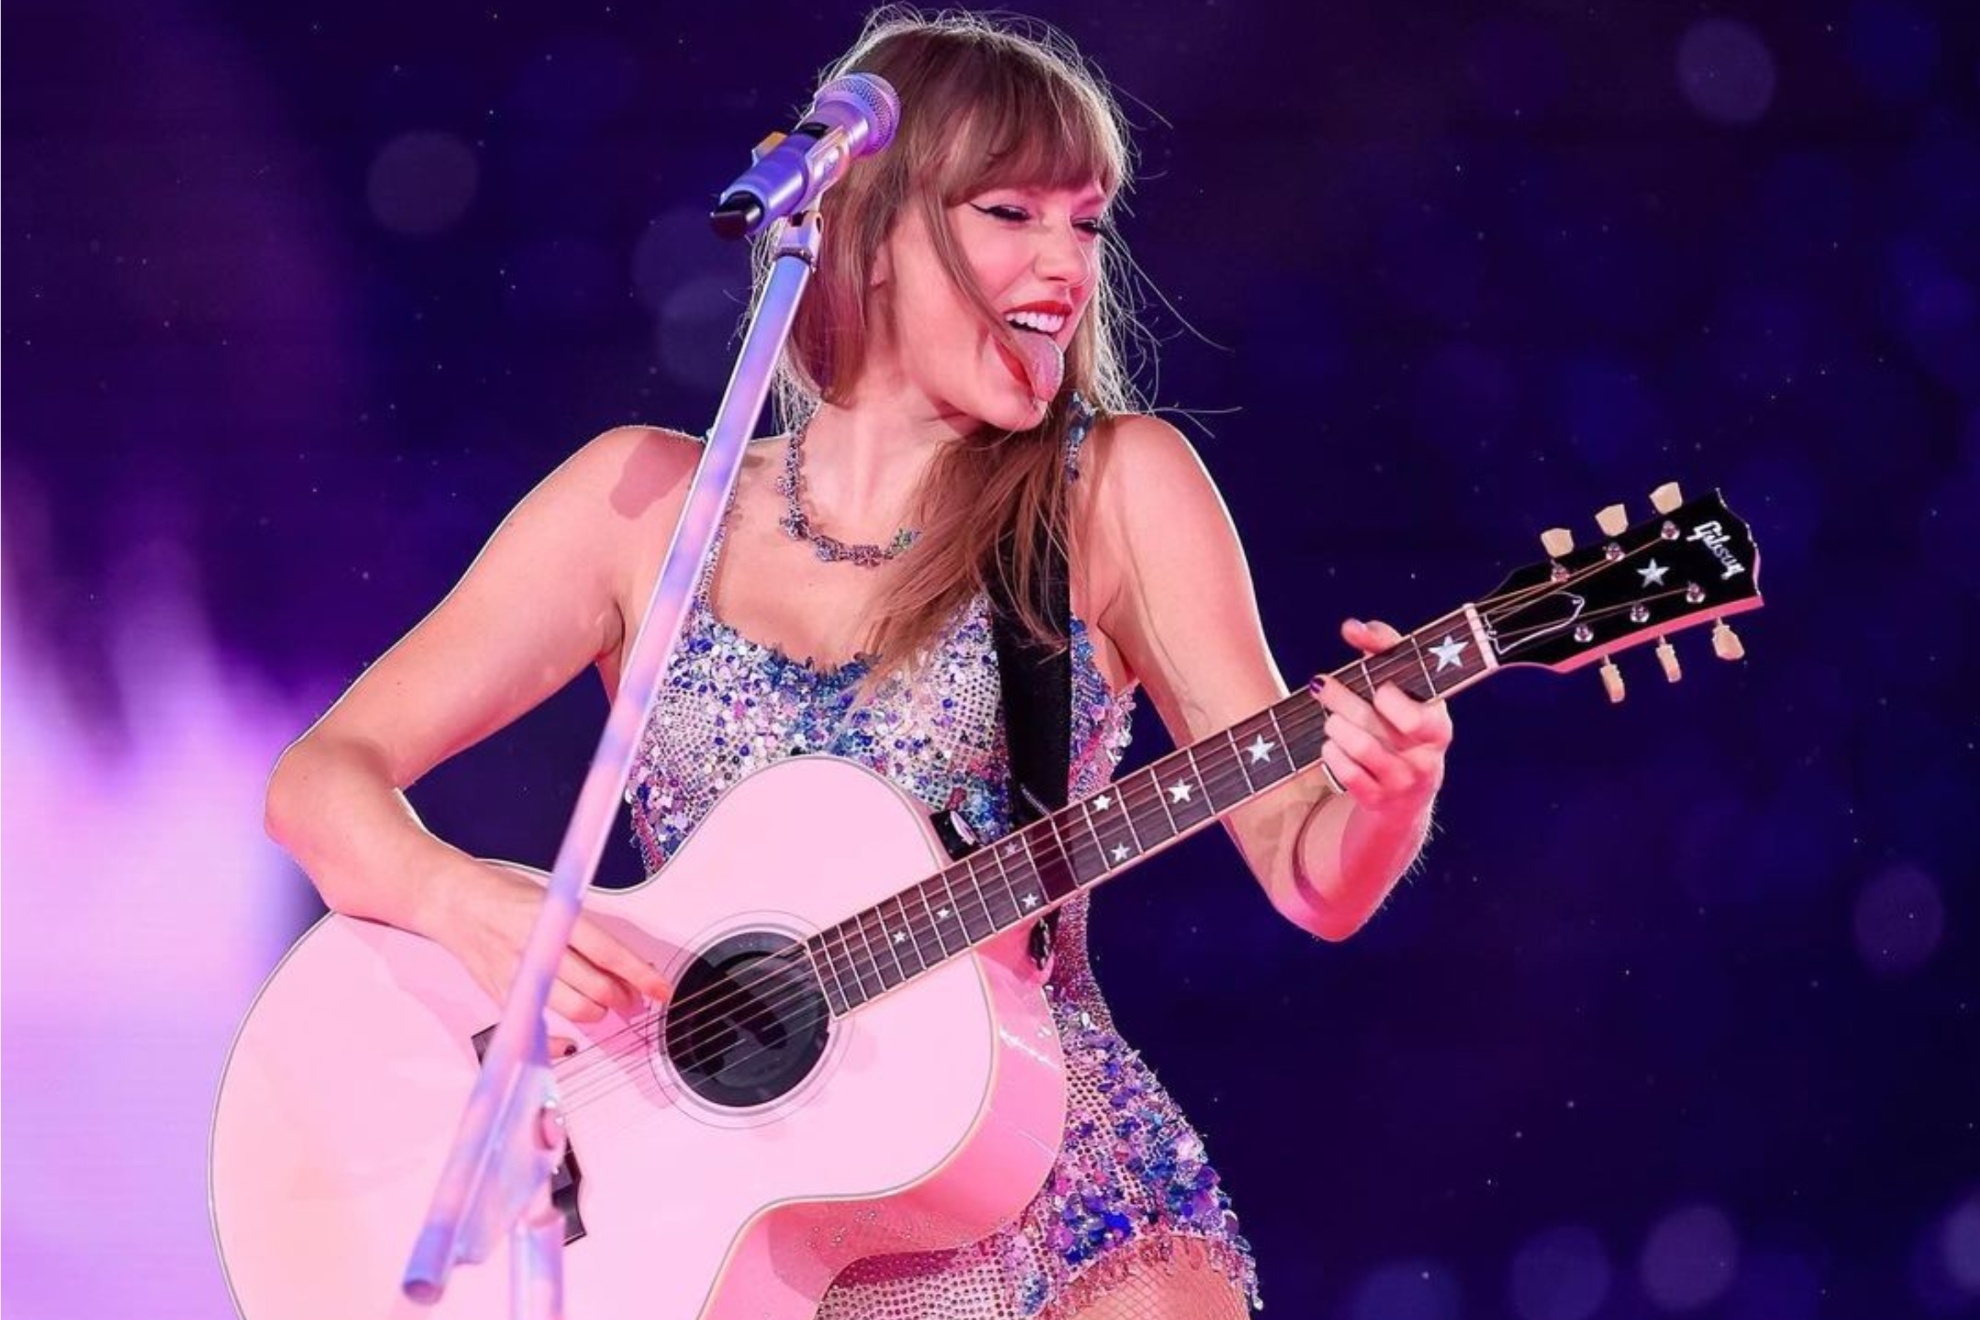 Pop star Taylor Swift is performing in Japan.